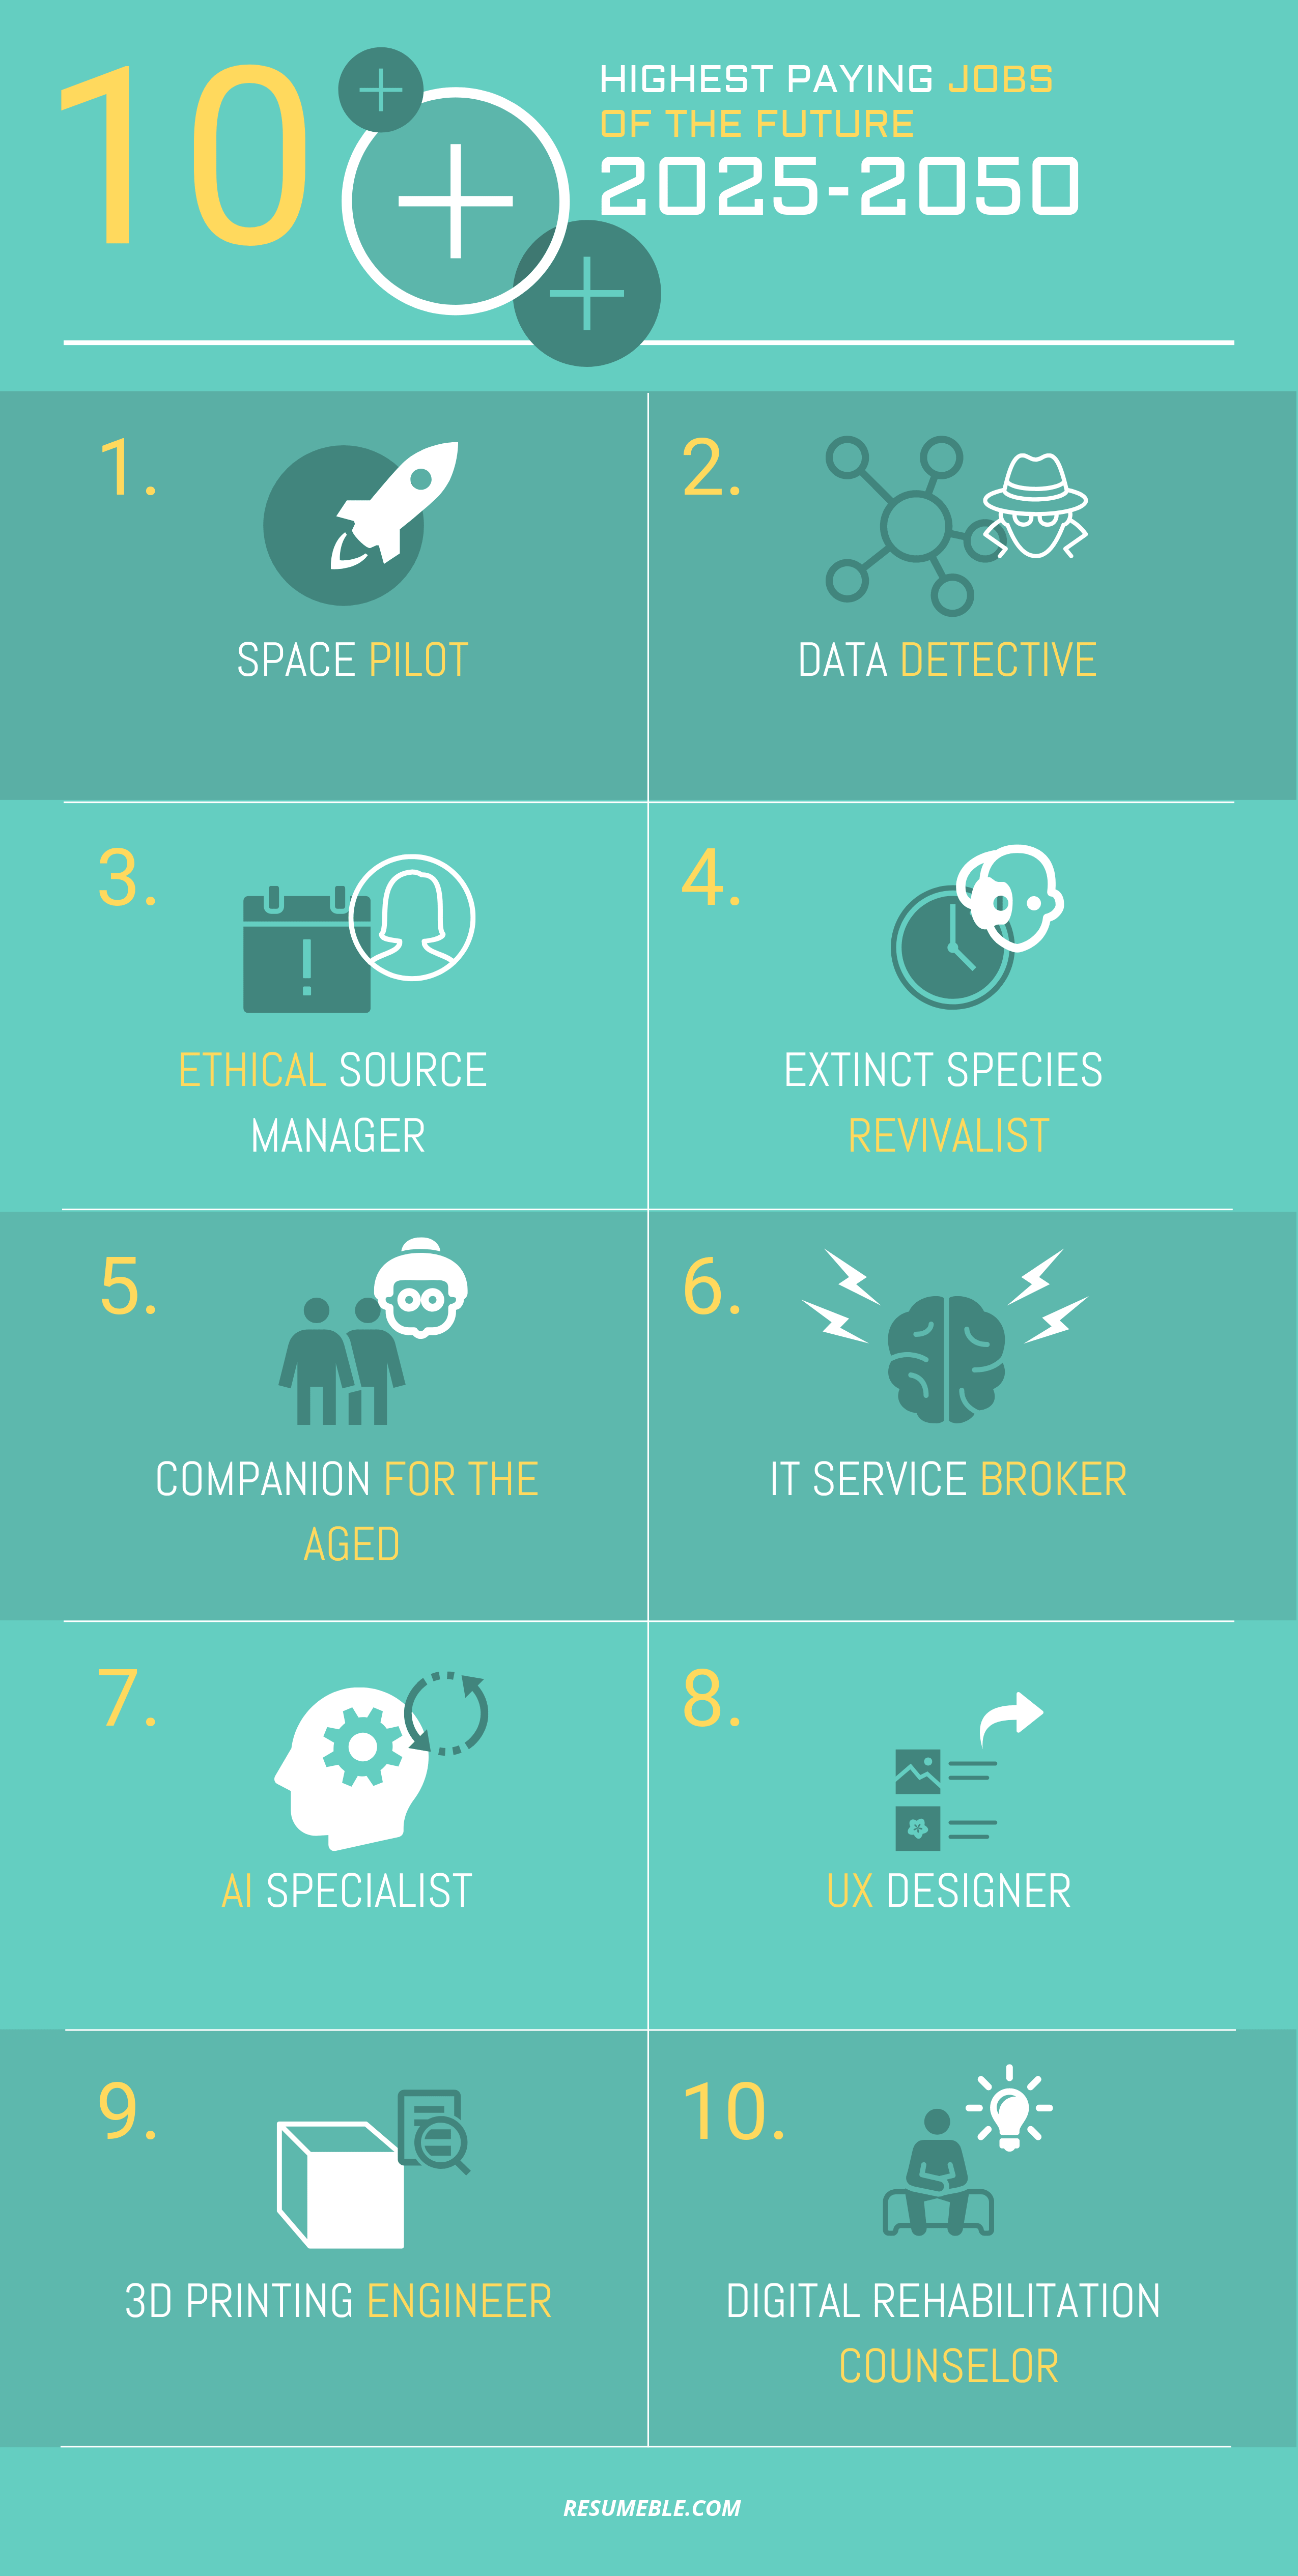 What will be the most popular jobs in the future